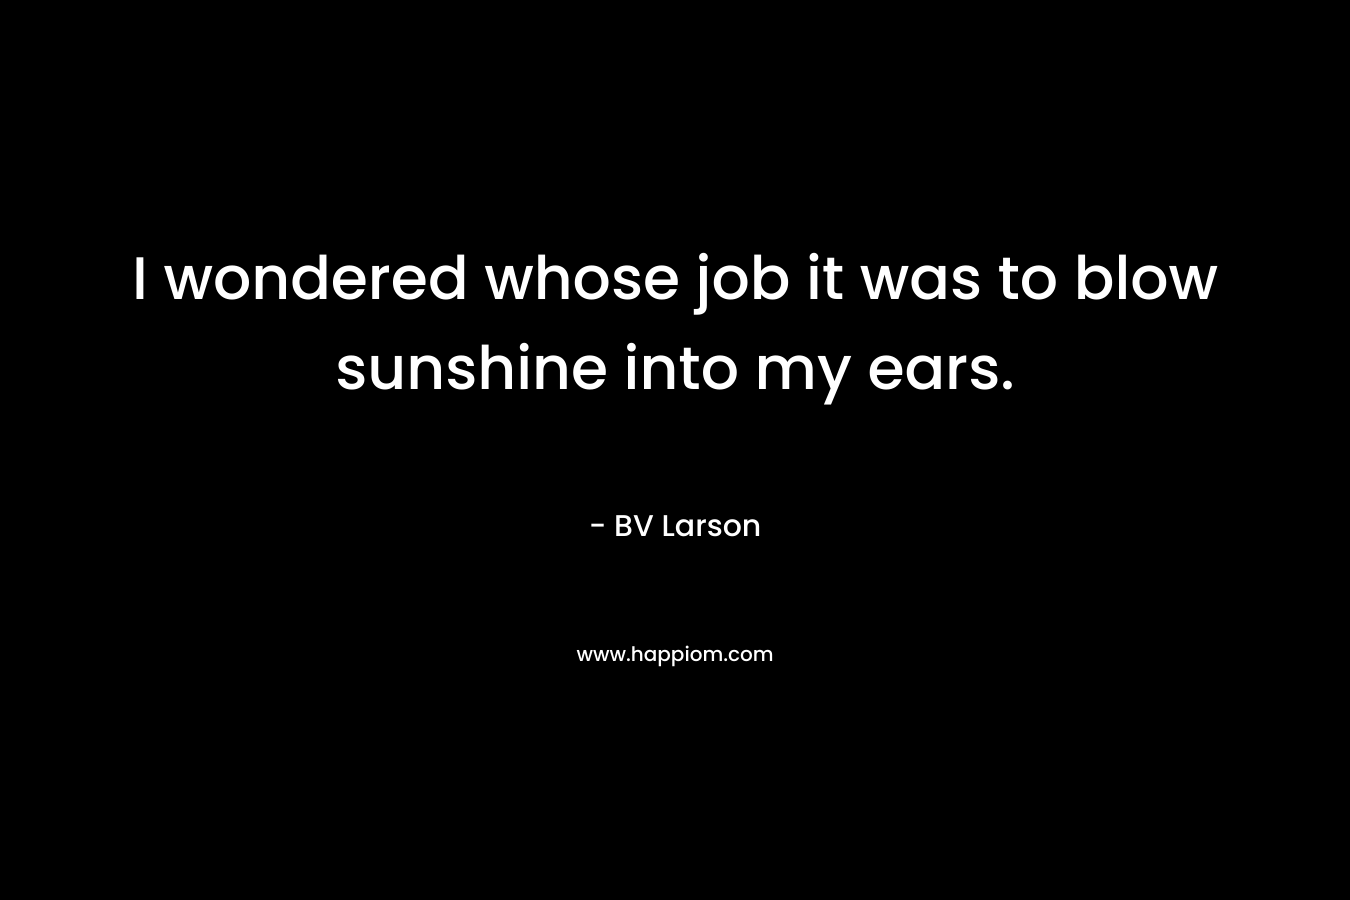 I wondered whose job it was to blow sunshine into my ears.